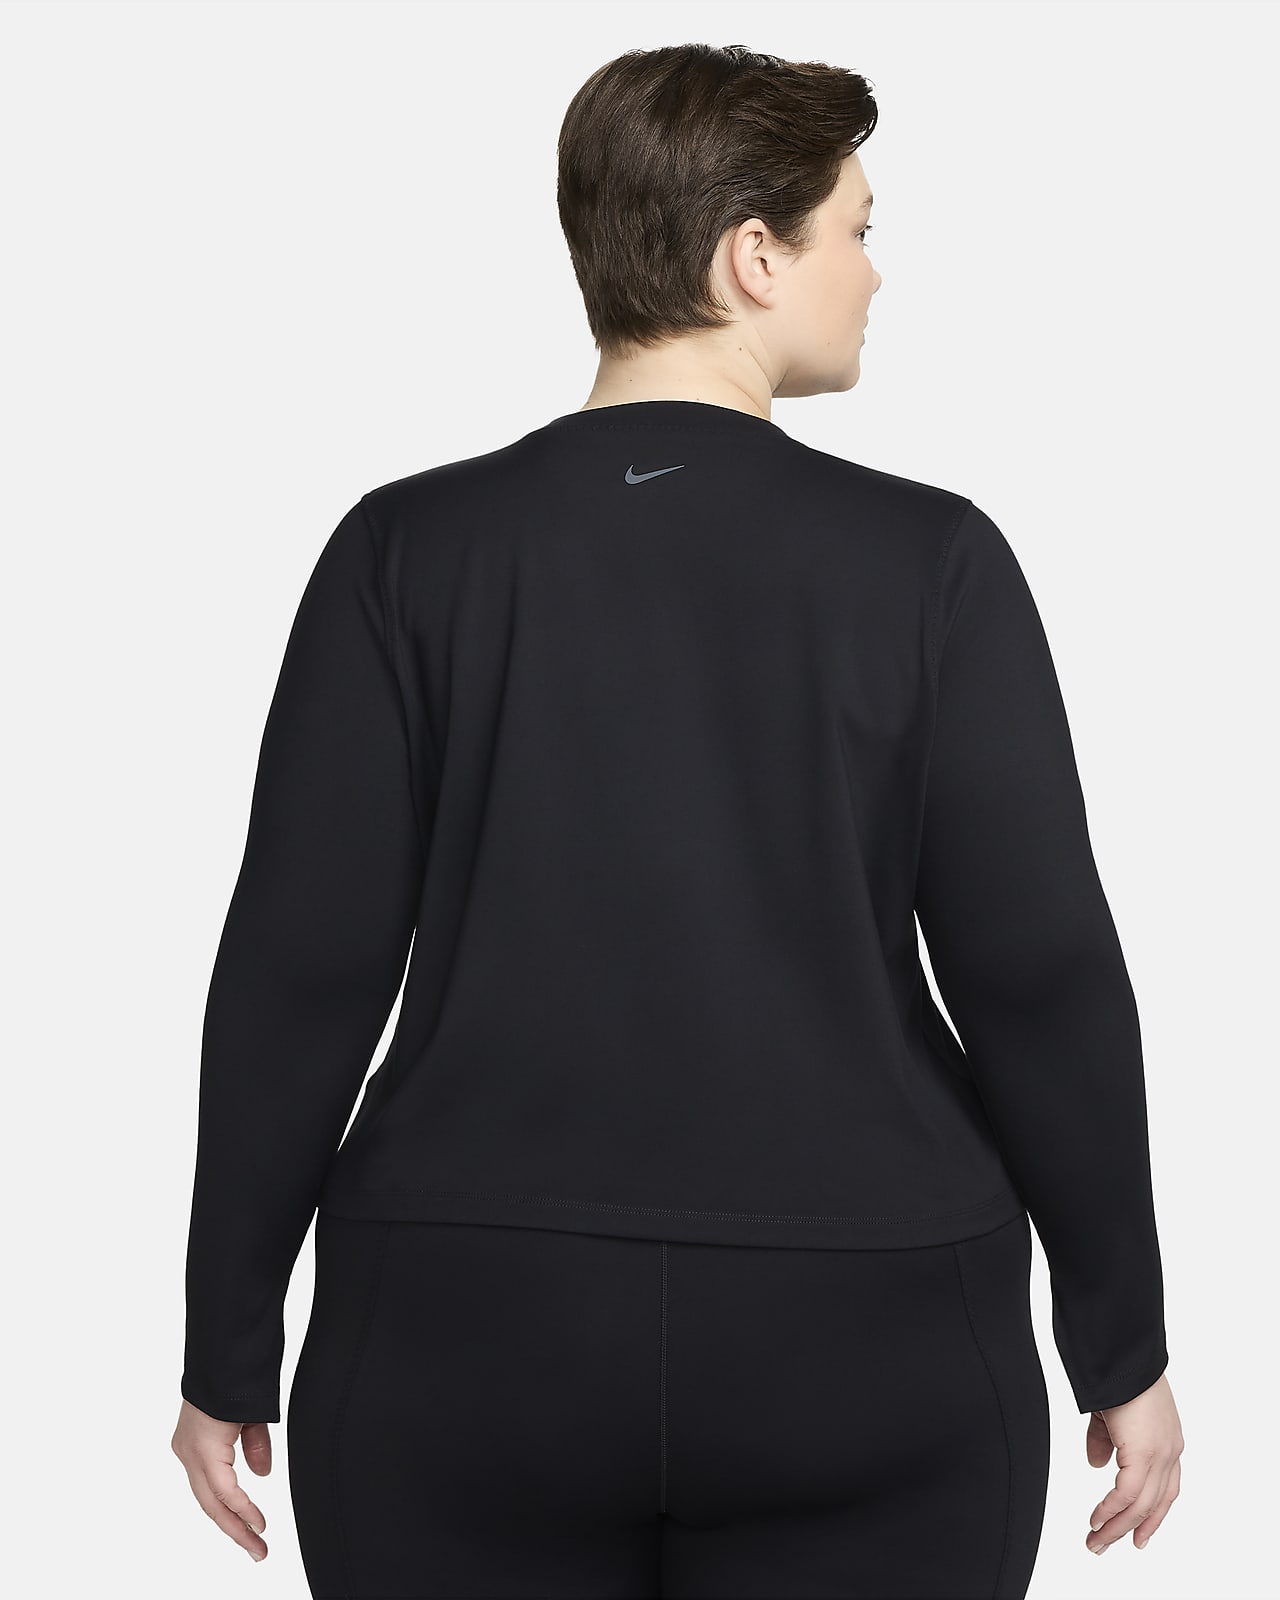 Nike One Fitted Women's Dri-FIT Long-Sleeve Top (Plus Size).